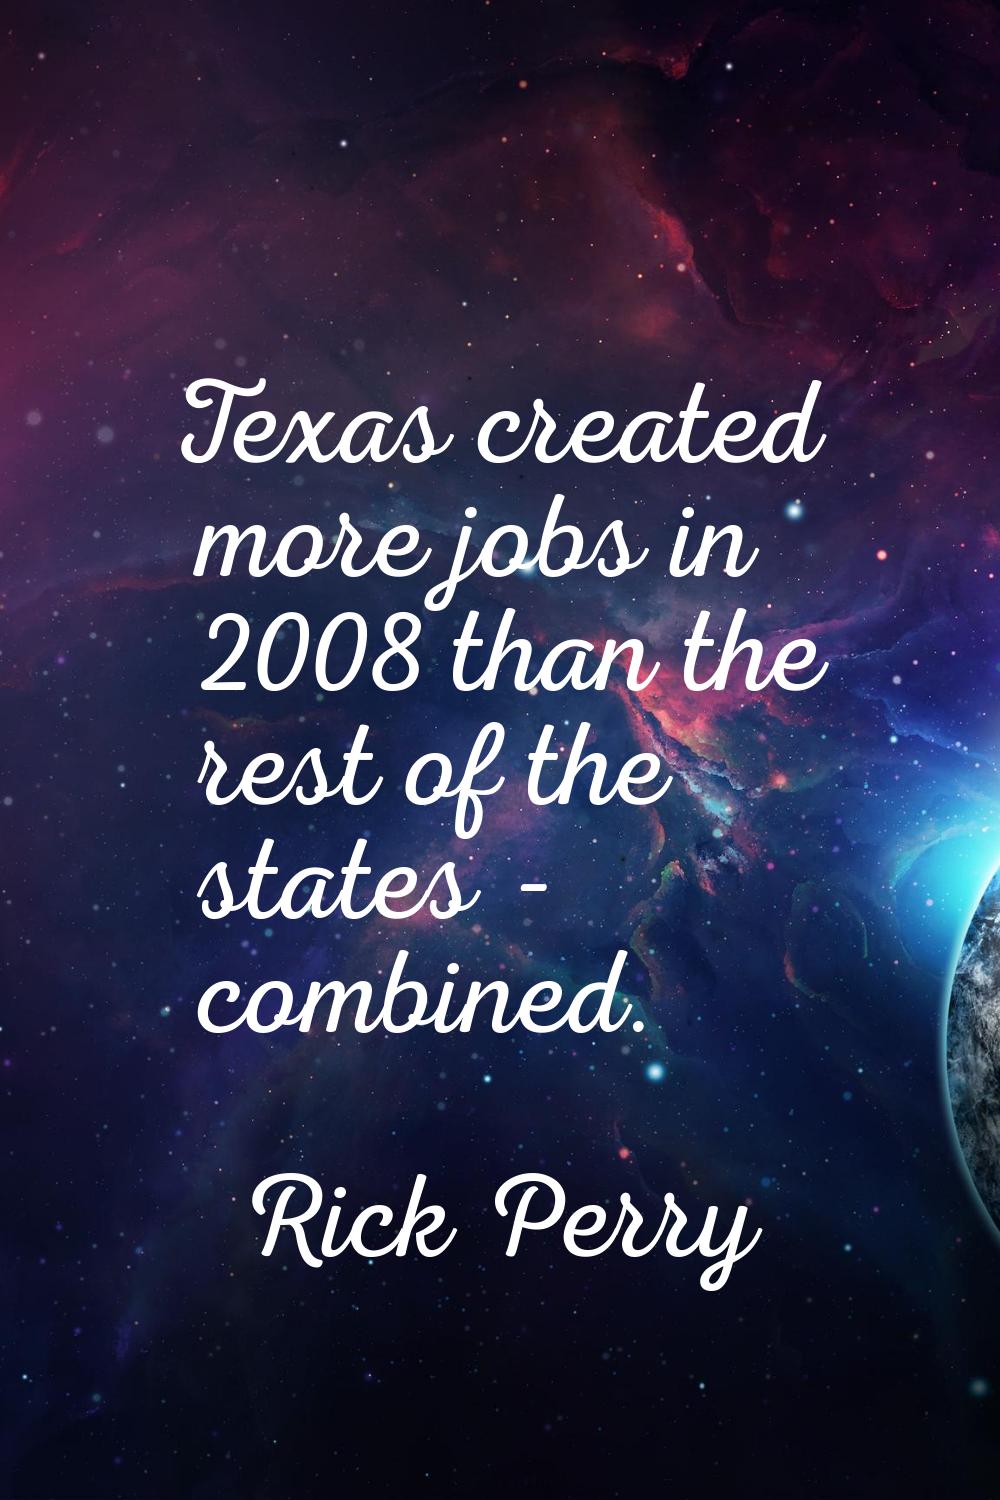 Texas created more jobs in 2008 than the rest of the states - combined.